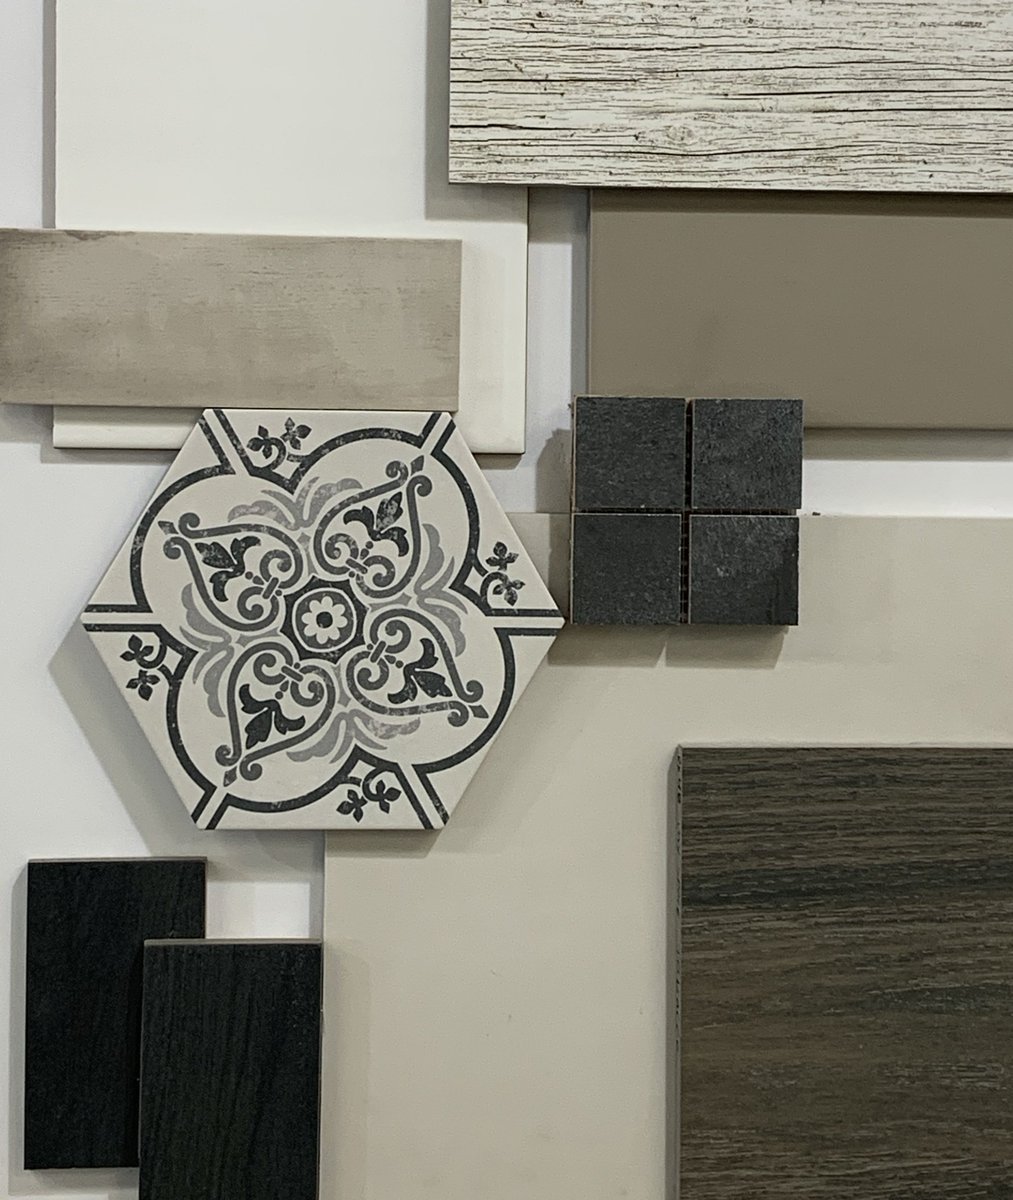 Just ready for you one of our new board! Stop by at the showroom to see all the gallery! *CAL TILE CENTER SHOWROOM* 5108 W. 190th Street, Torrance, CA

#caltilecenter #tilemoodboard #tilemoodboards #tile #design #newideas #homedecor #homedesign #besttile #lovedesign #home #decor